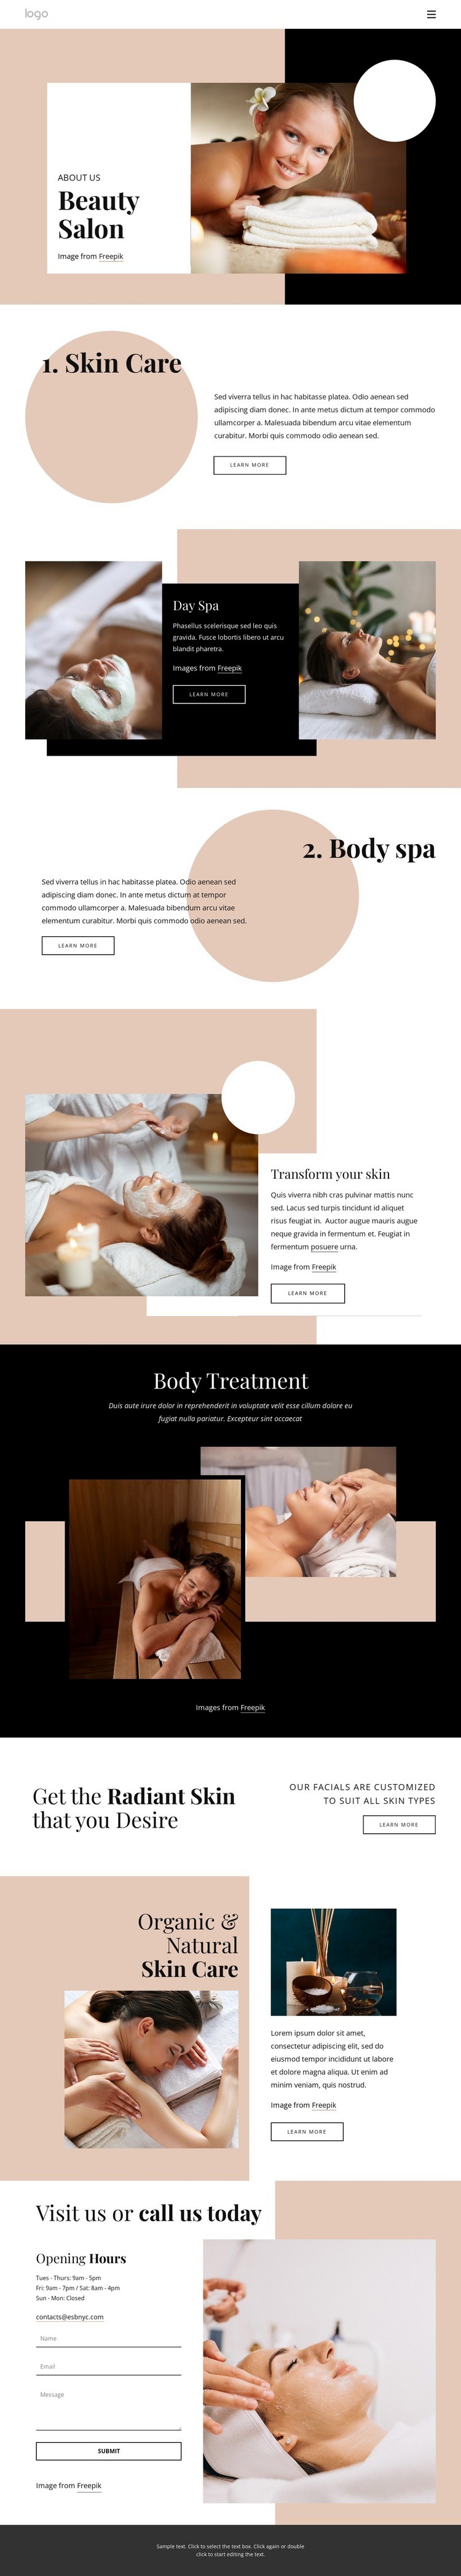 New wellness experiences Web Page Design